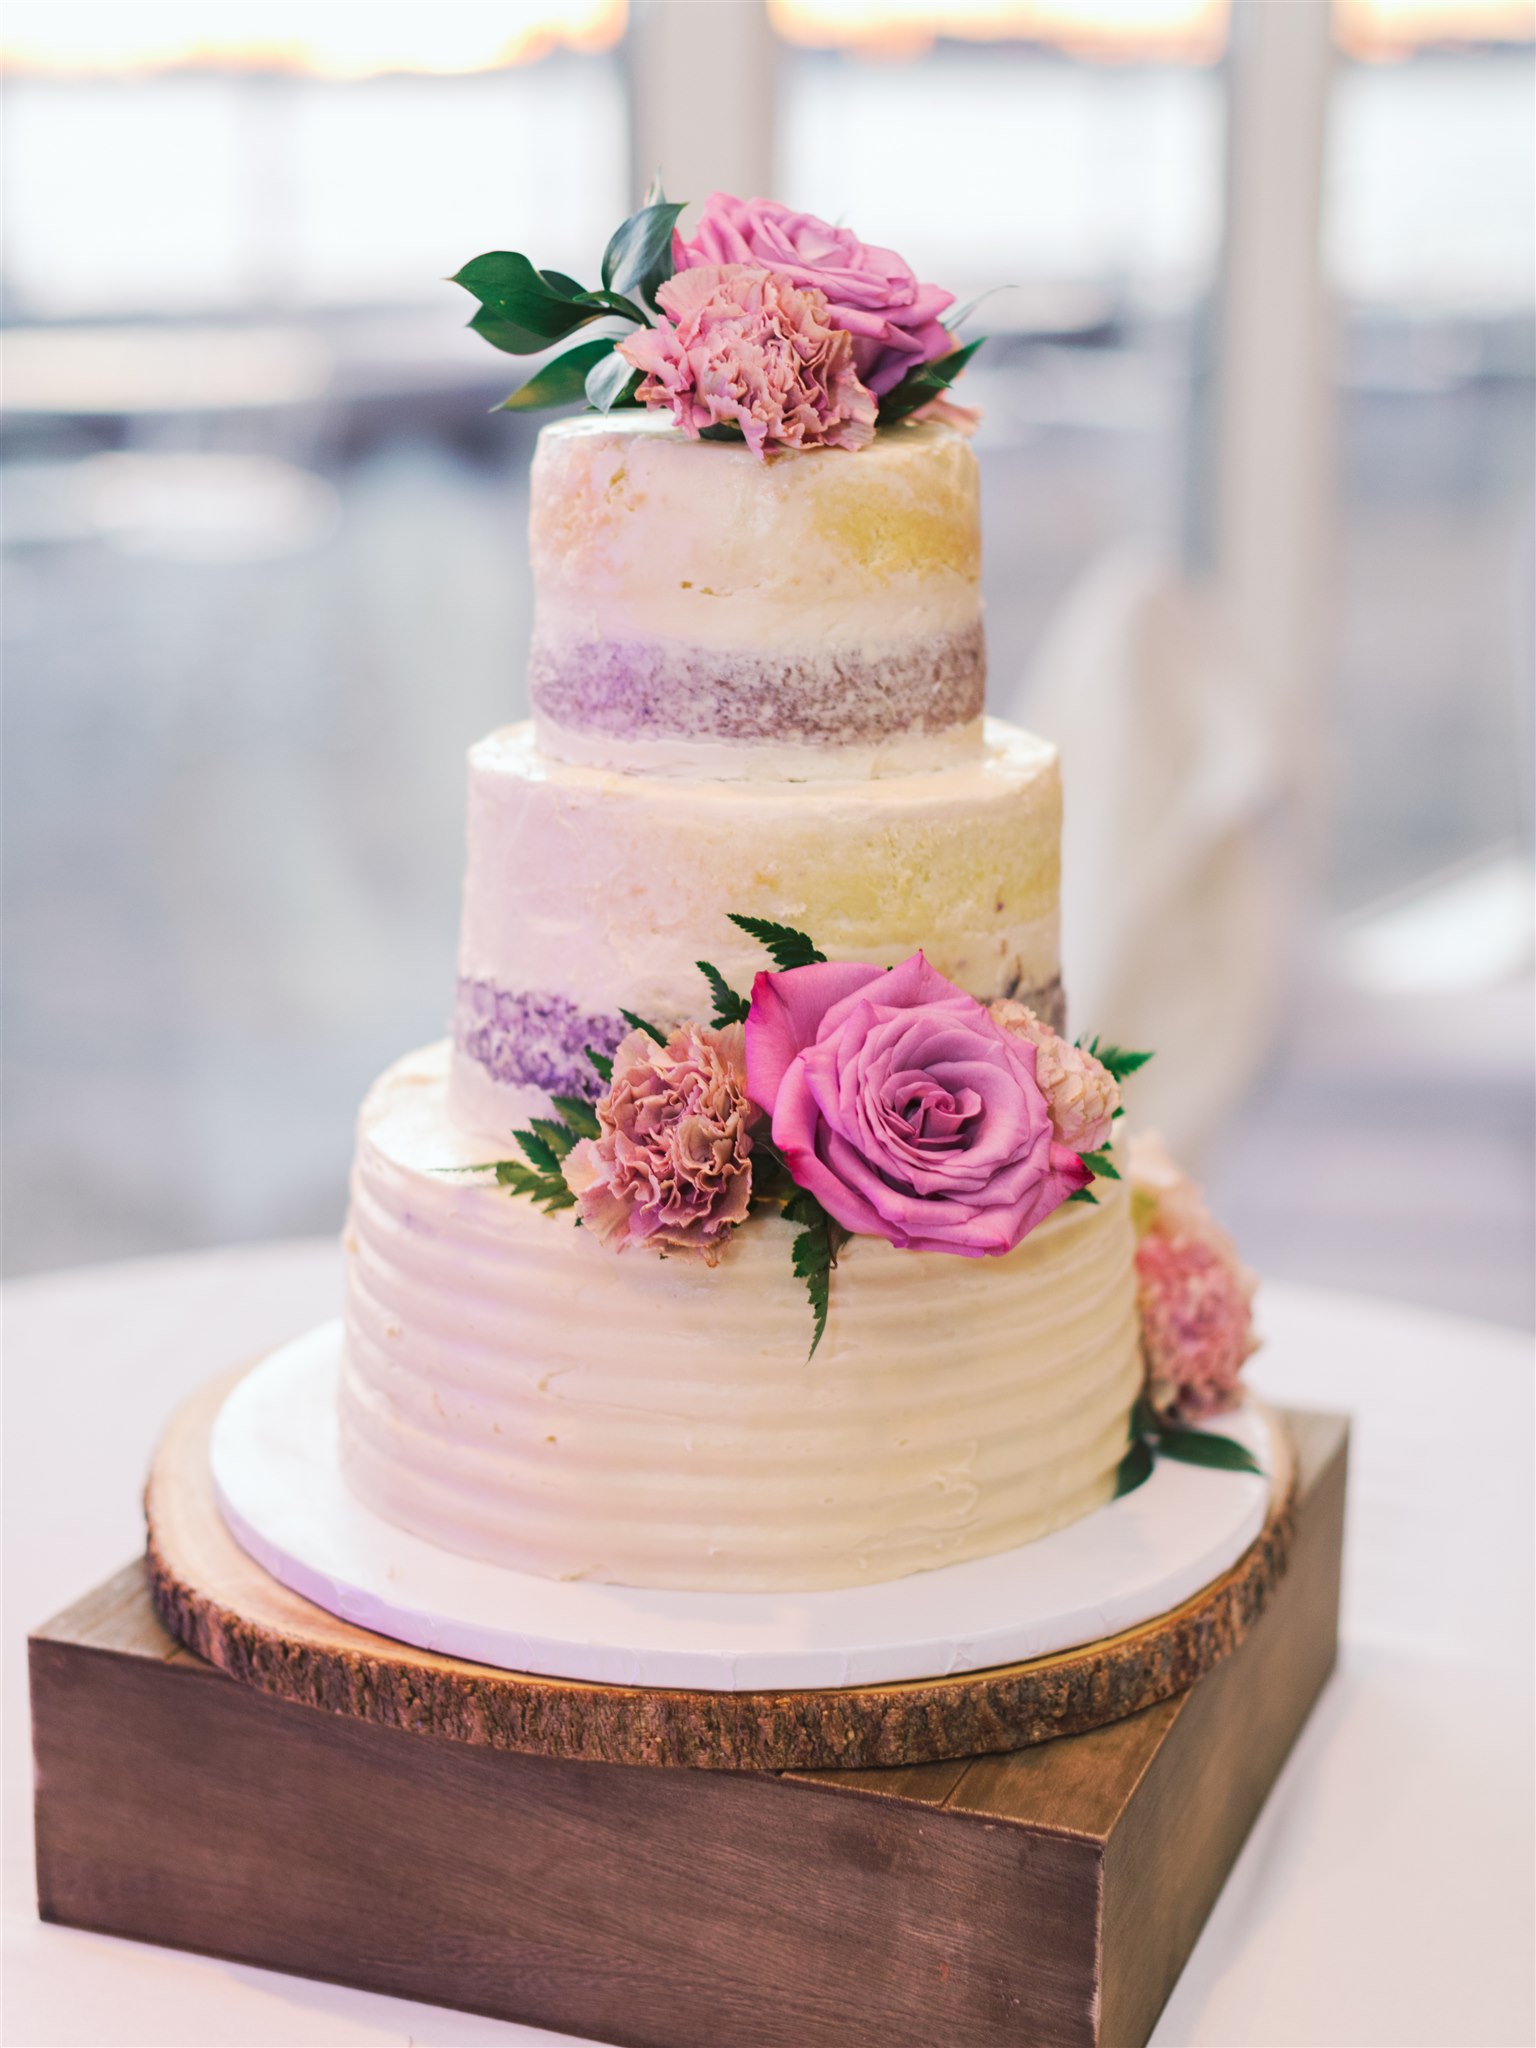 tiered wedding cake with pink and purple flowers